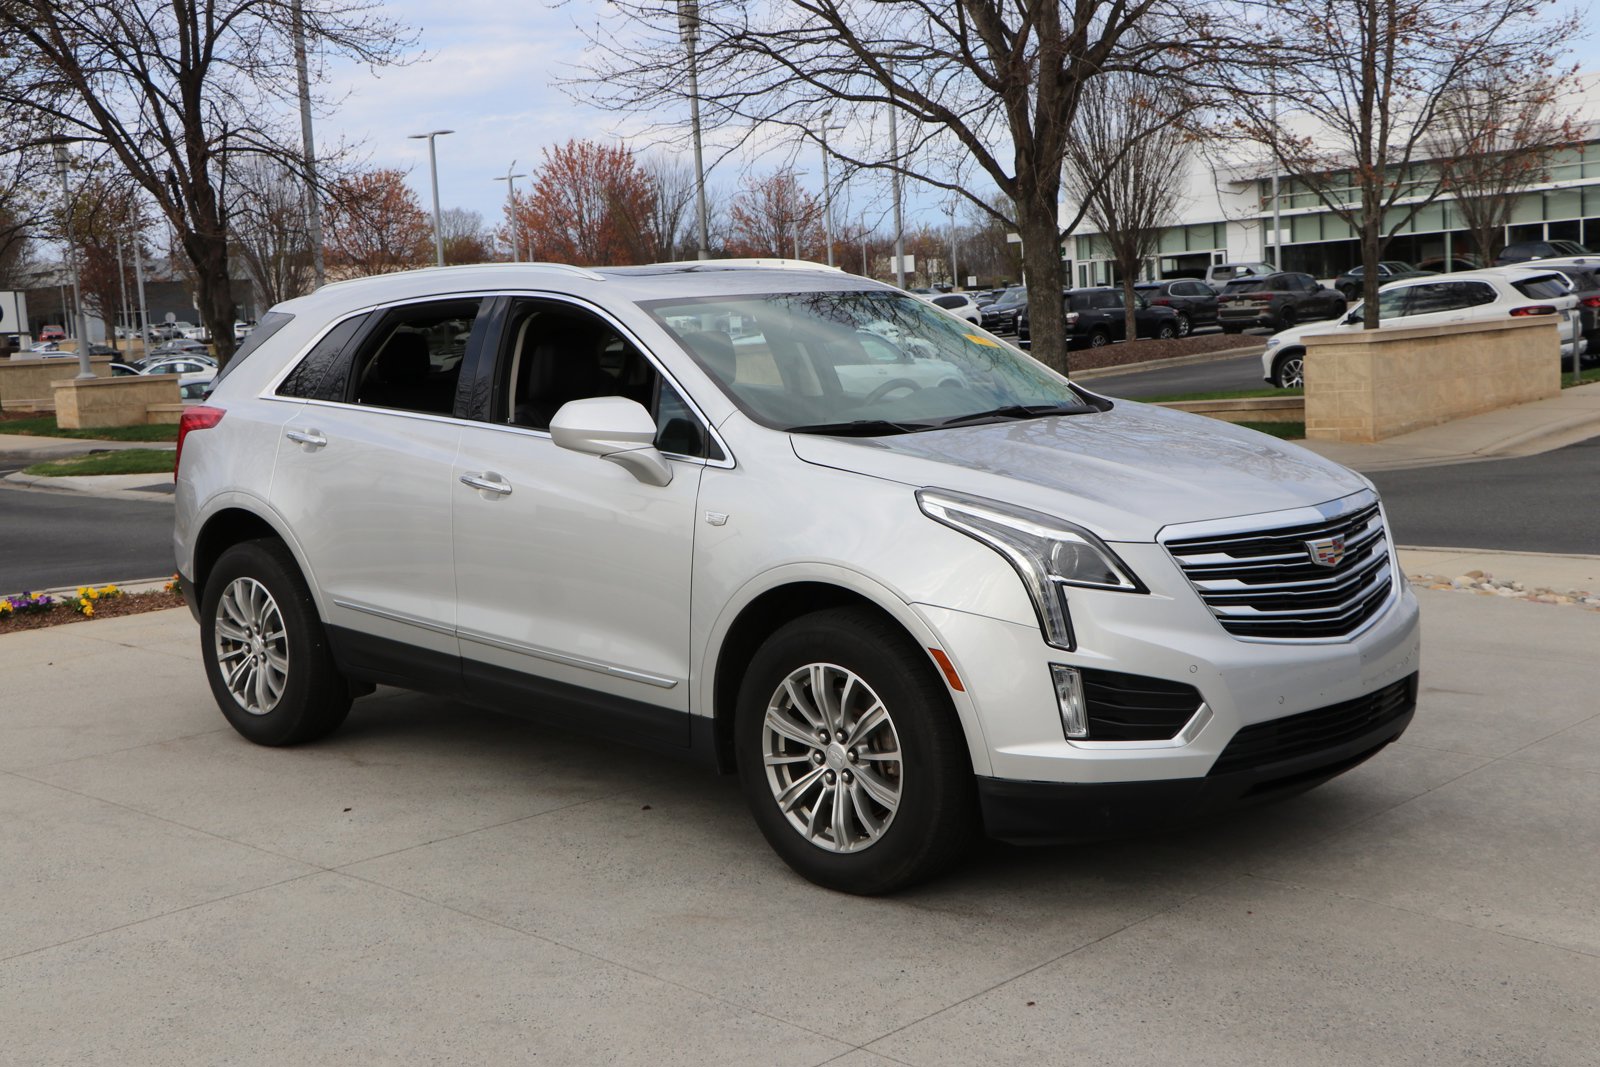 Pre-Owned 2018 Cadillac XT5 Luxury FWD SUV in Cary #Q23291A | Hendrick  Dodge Cary